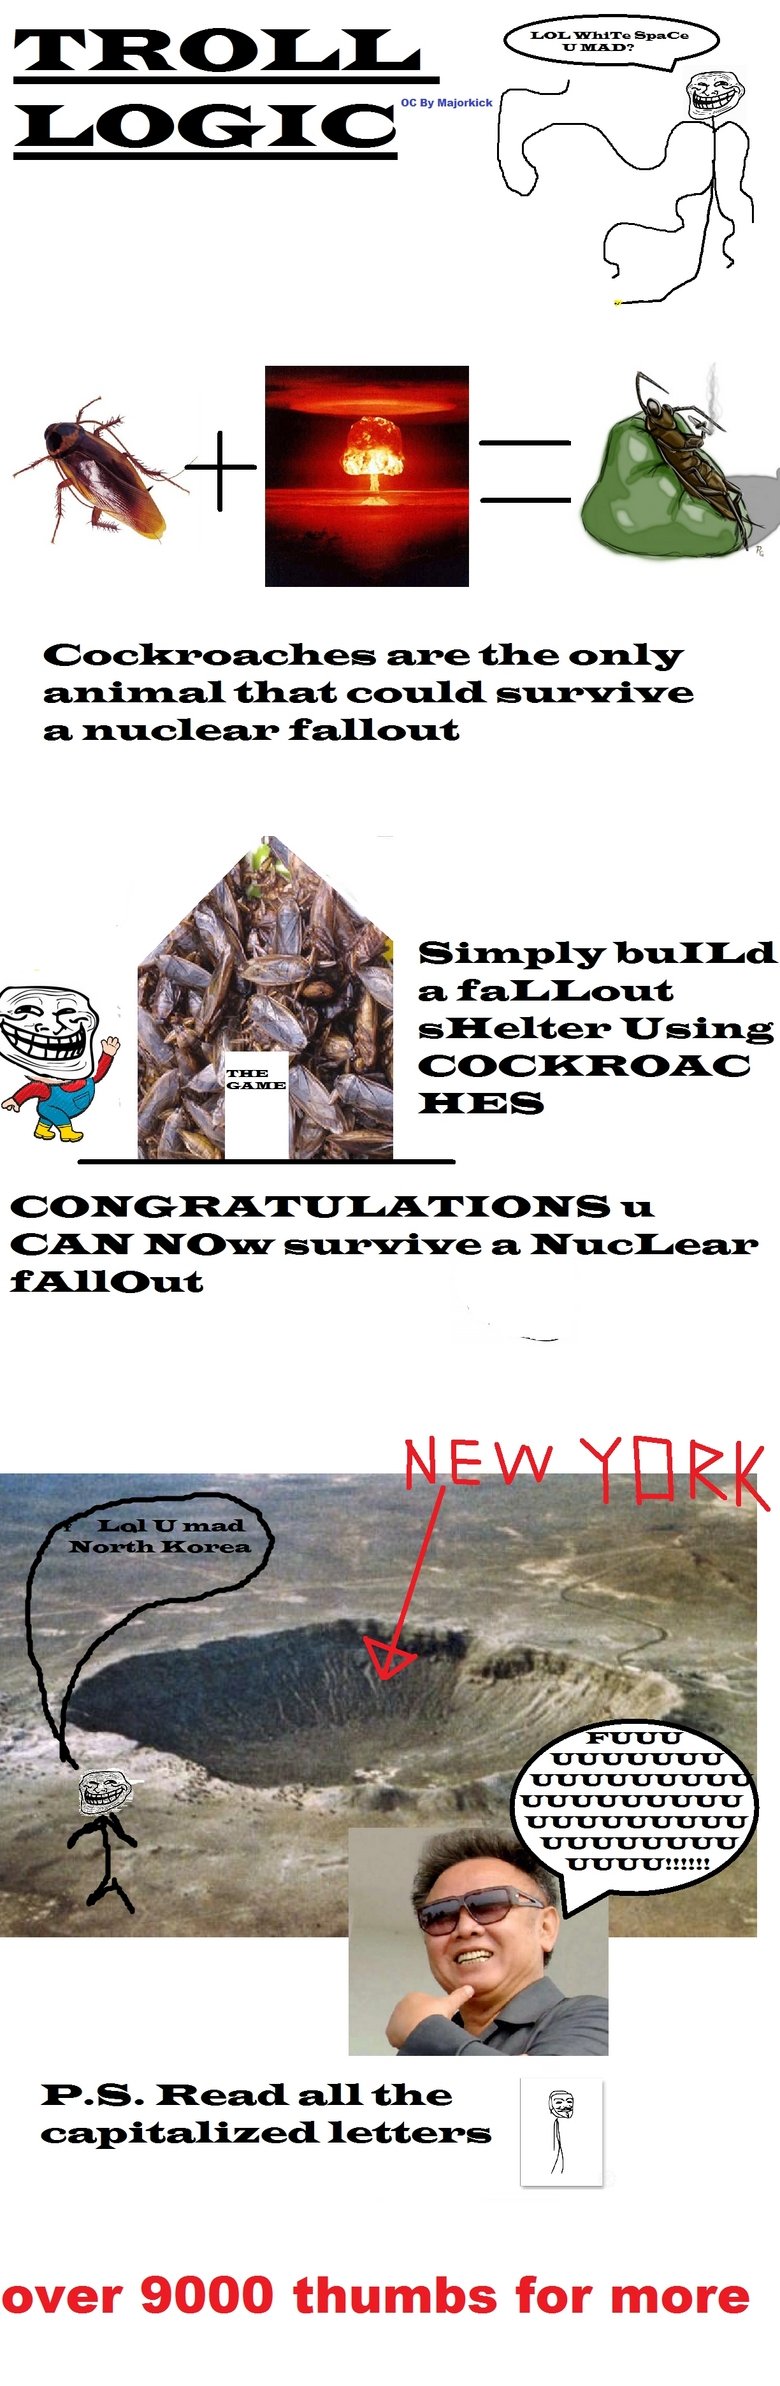 TrOLL LoGiC. Genuine OC don't really give a about thumbs just doin it for da lolz. TROLL Cockroaches are the only animal that could survive a nuclear fallout rs